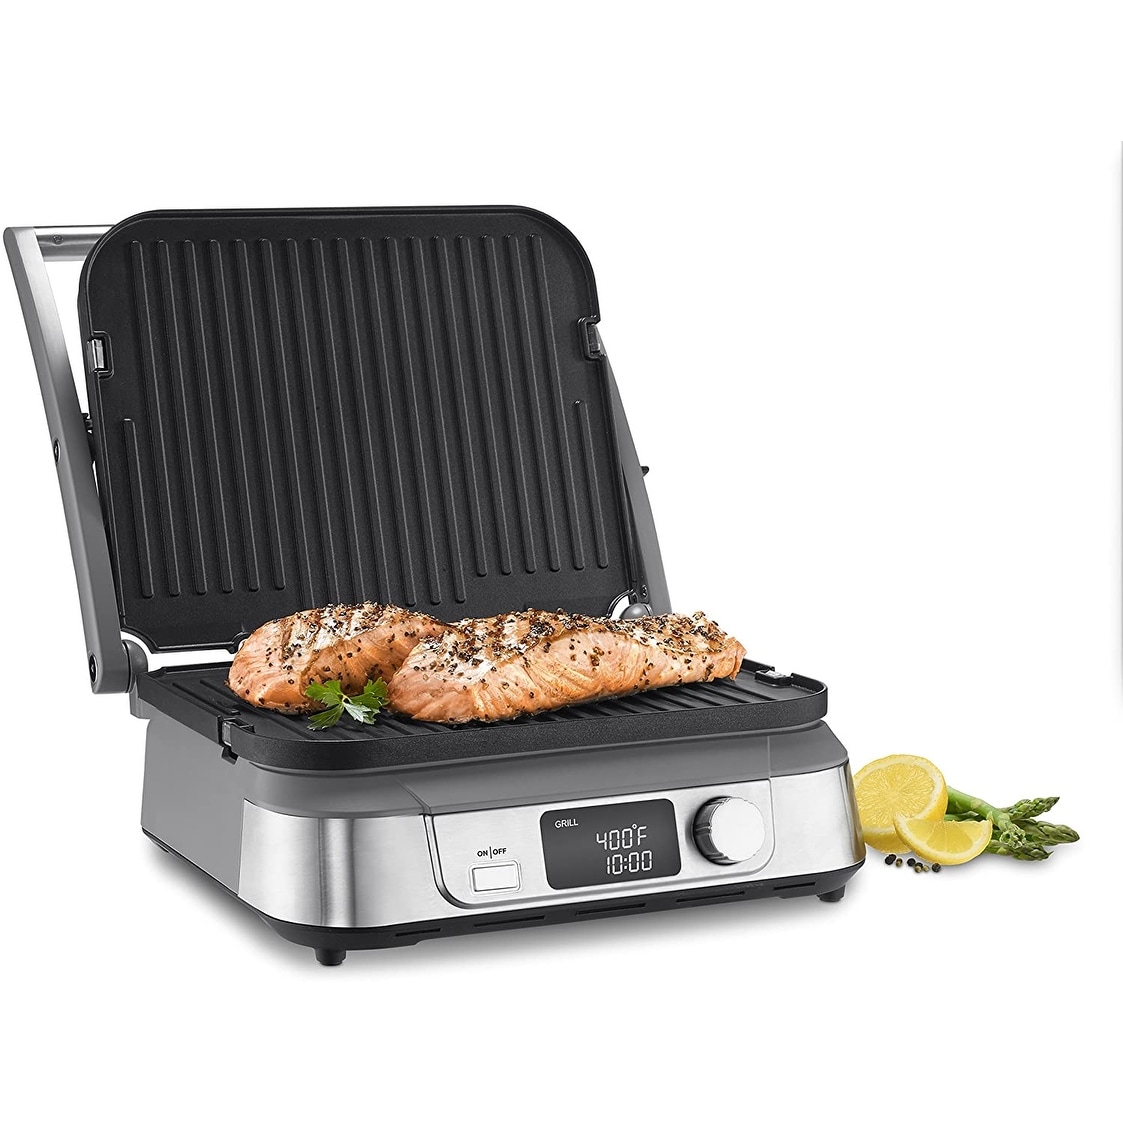 https://ak1.ostkcdn.com/images/products/is/images/direct/36ae239811a1f39f023de0f838205762c4220634/Cuisinart-Electric-Griddler%2C-Stainless-Steel.jpg